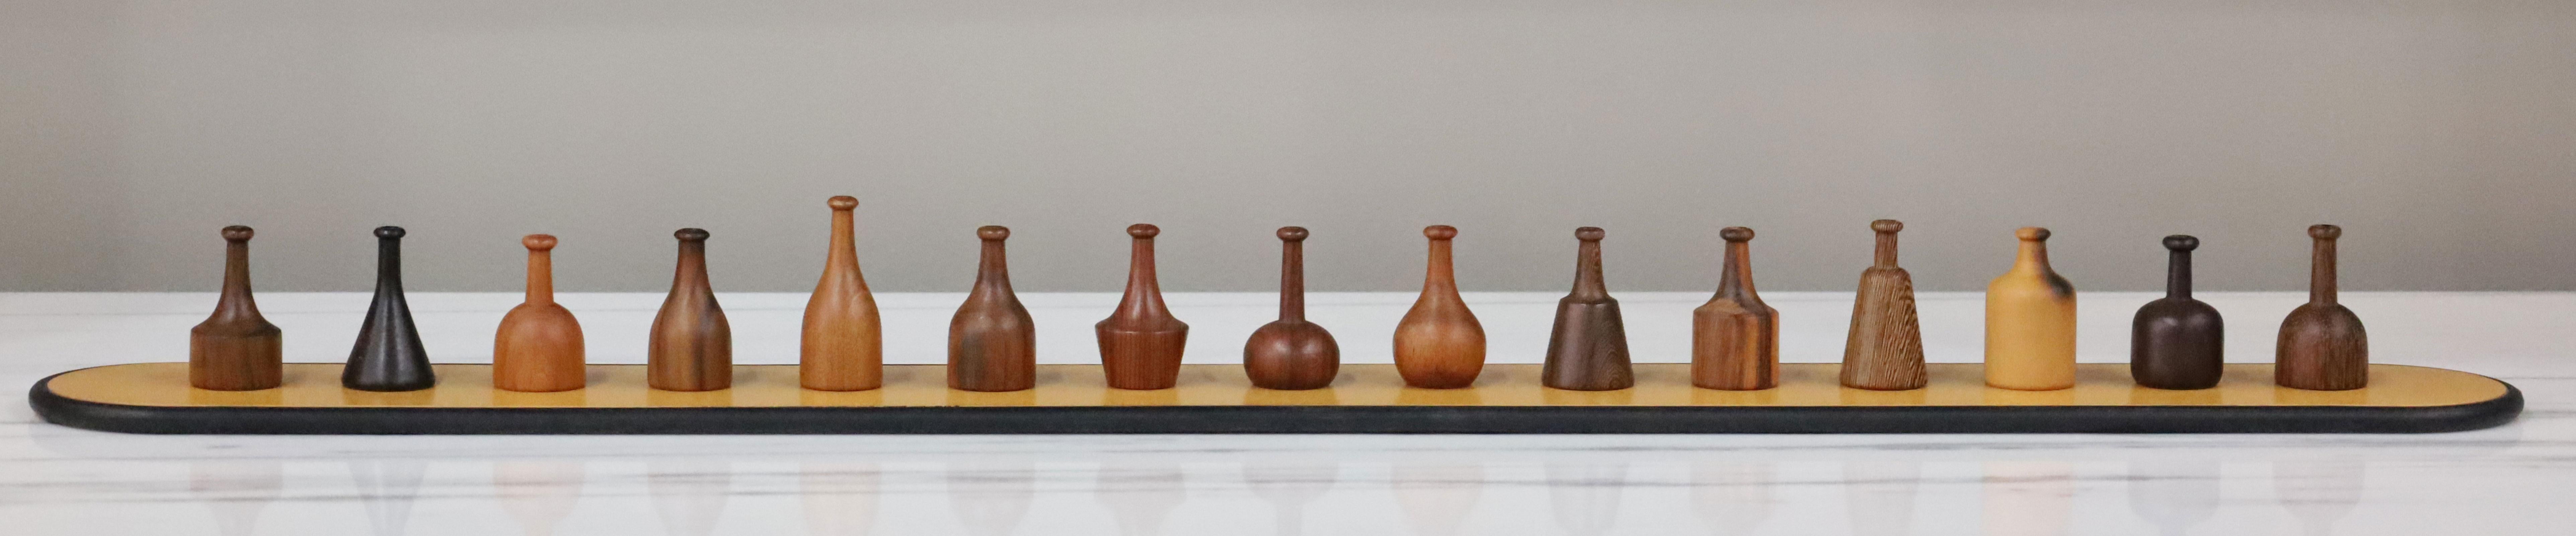 Giorgio Pizzitutti Exotic Wood Miniature Vases Sculpture Italy 1980's In Good Condition For Sale In Dallas, TX